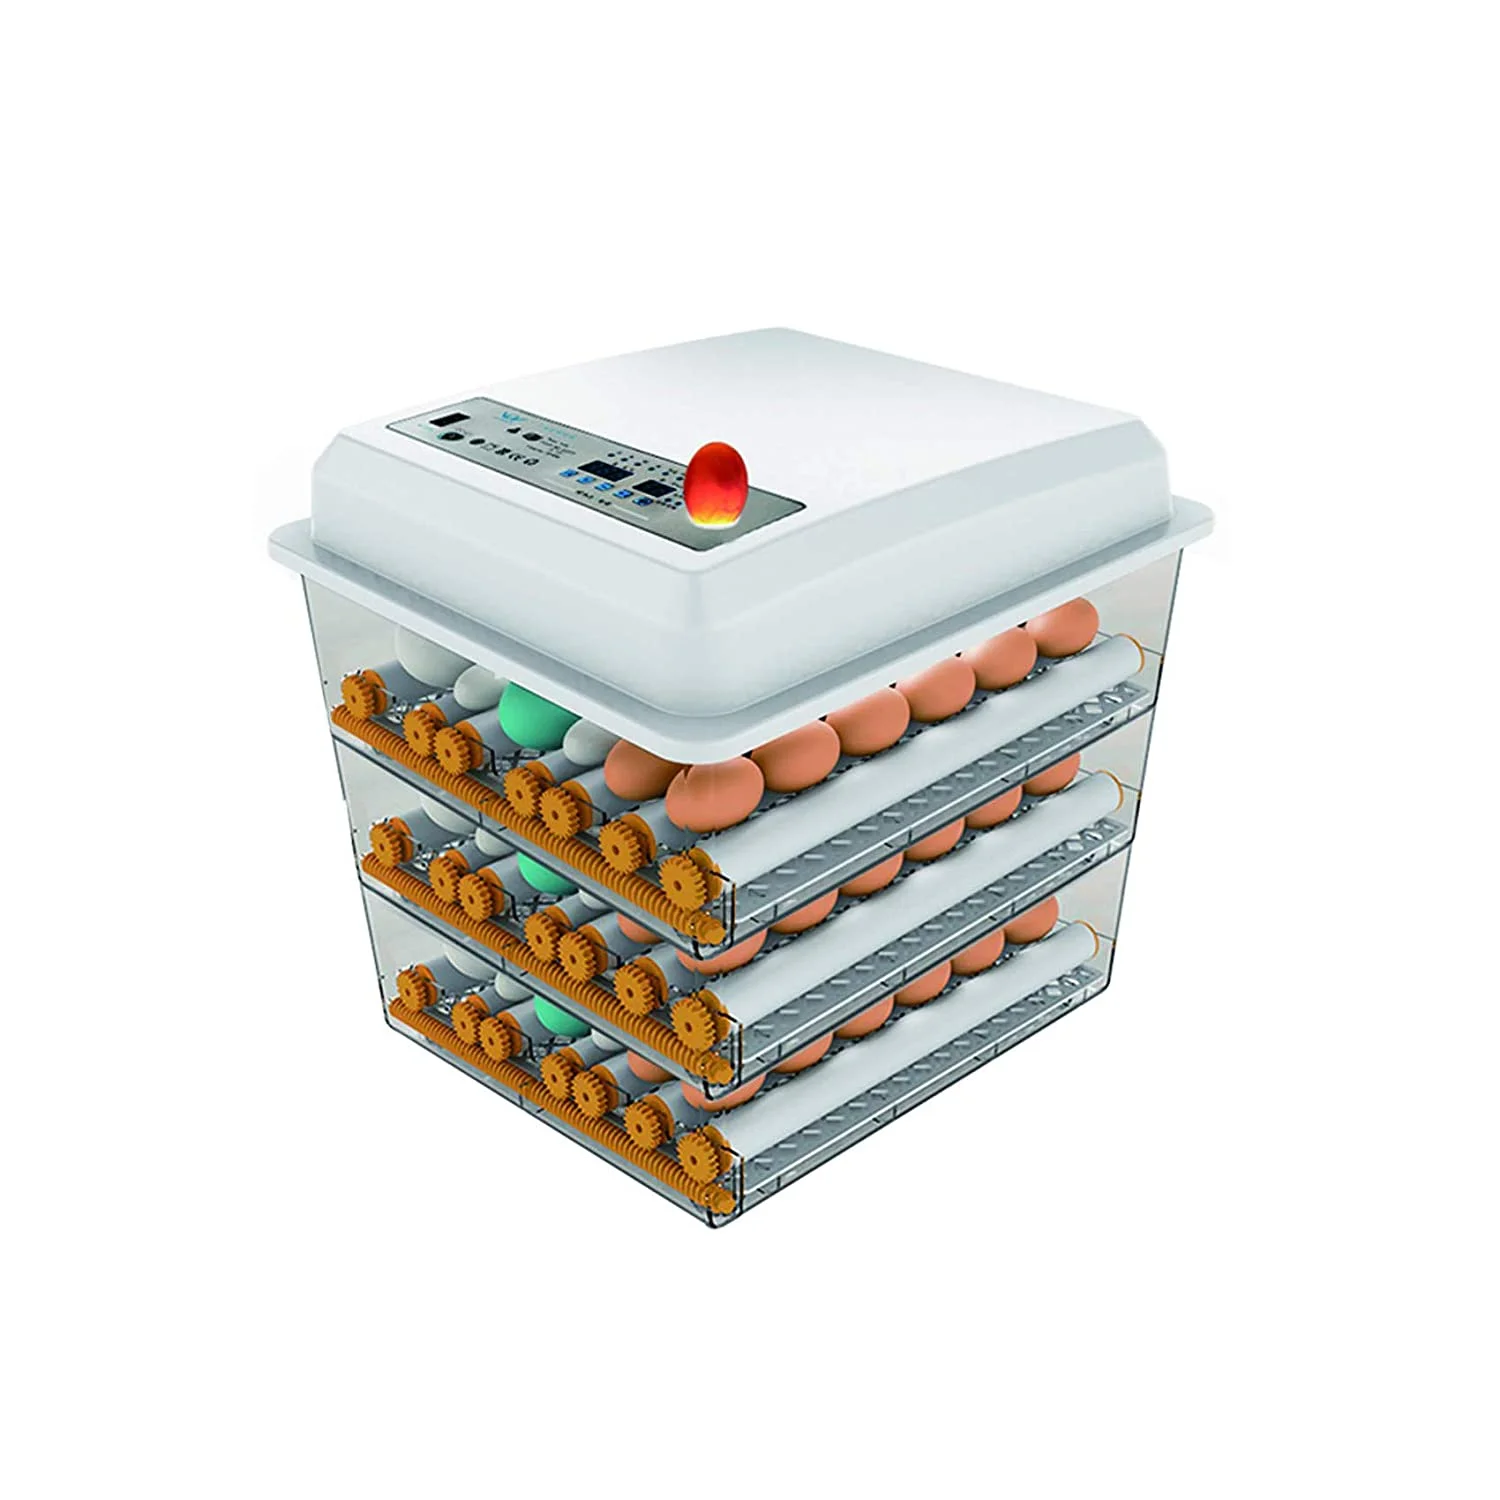 

Hot sale 176 eggs automatic chicken egg incubator for hatching chicken.